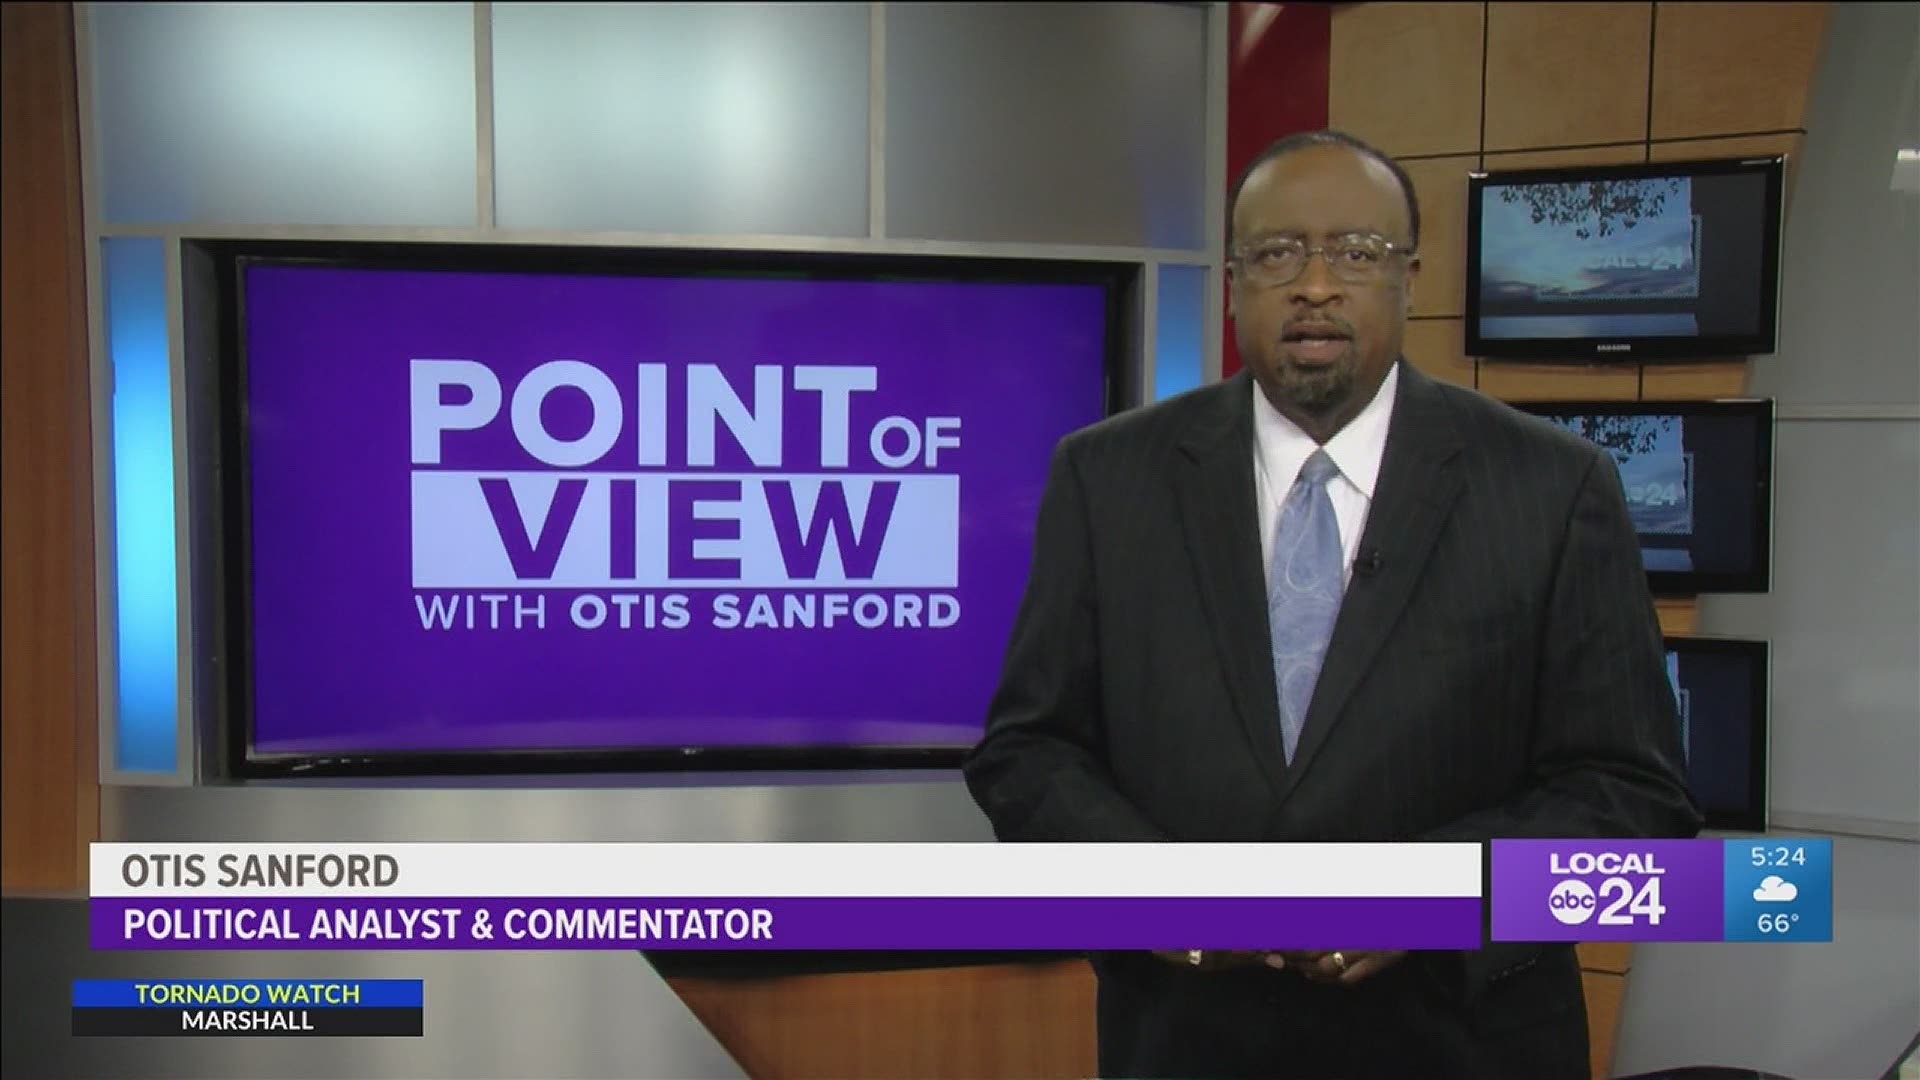 Local 24 News political analyst and commentator Otis Sanford shares his point of view on the search for a new Memphis Police Director.